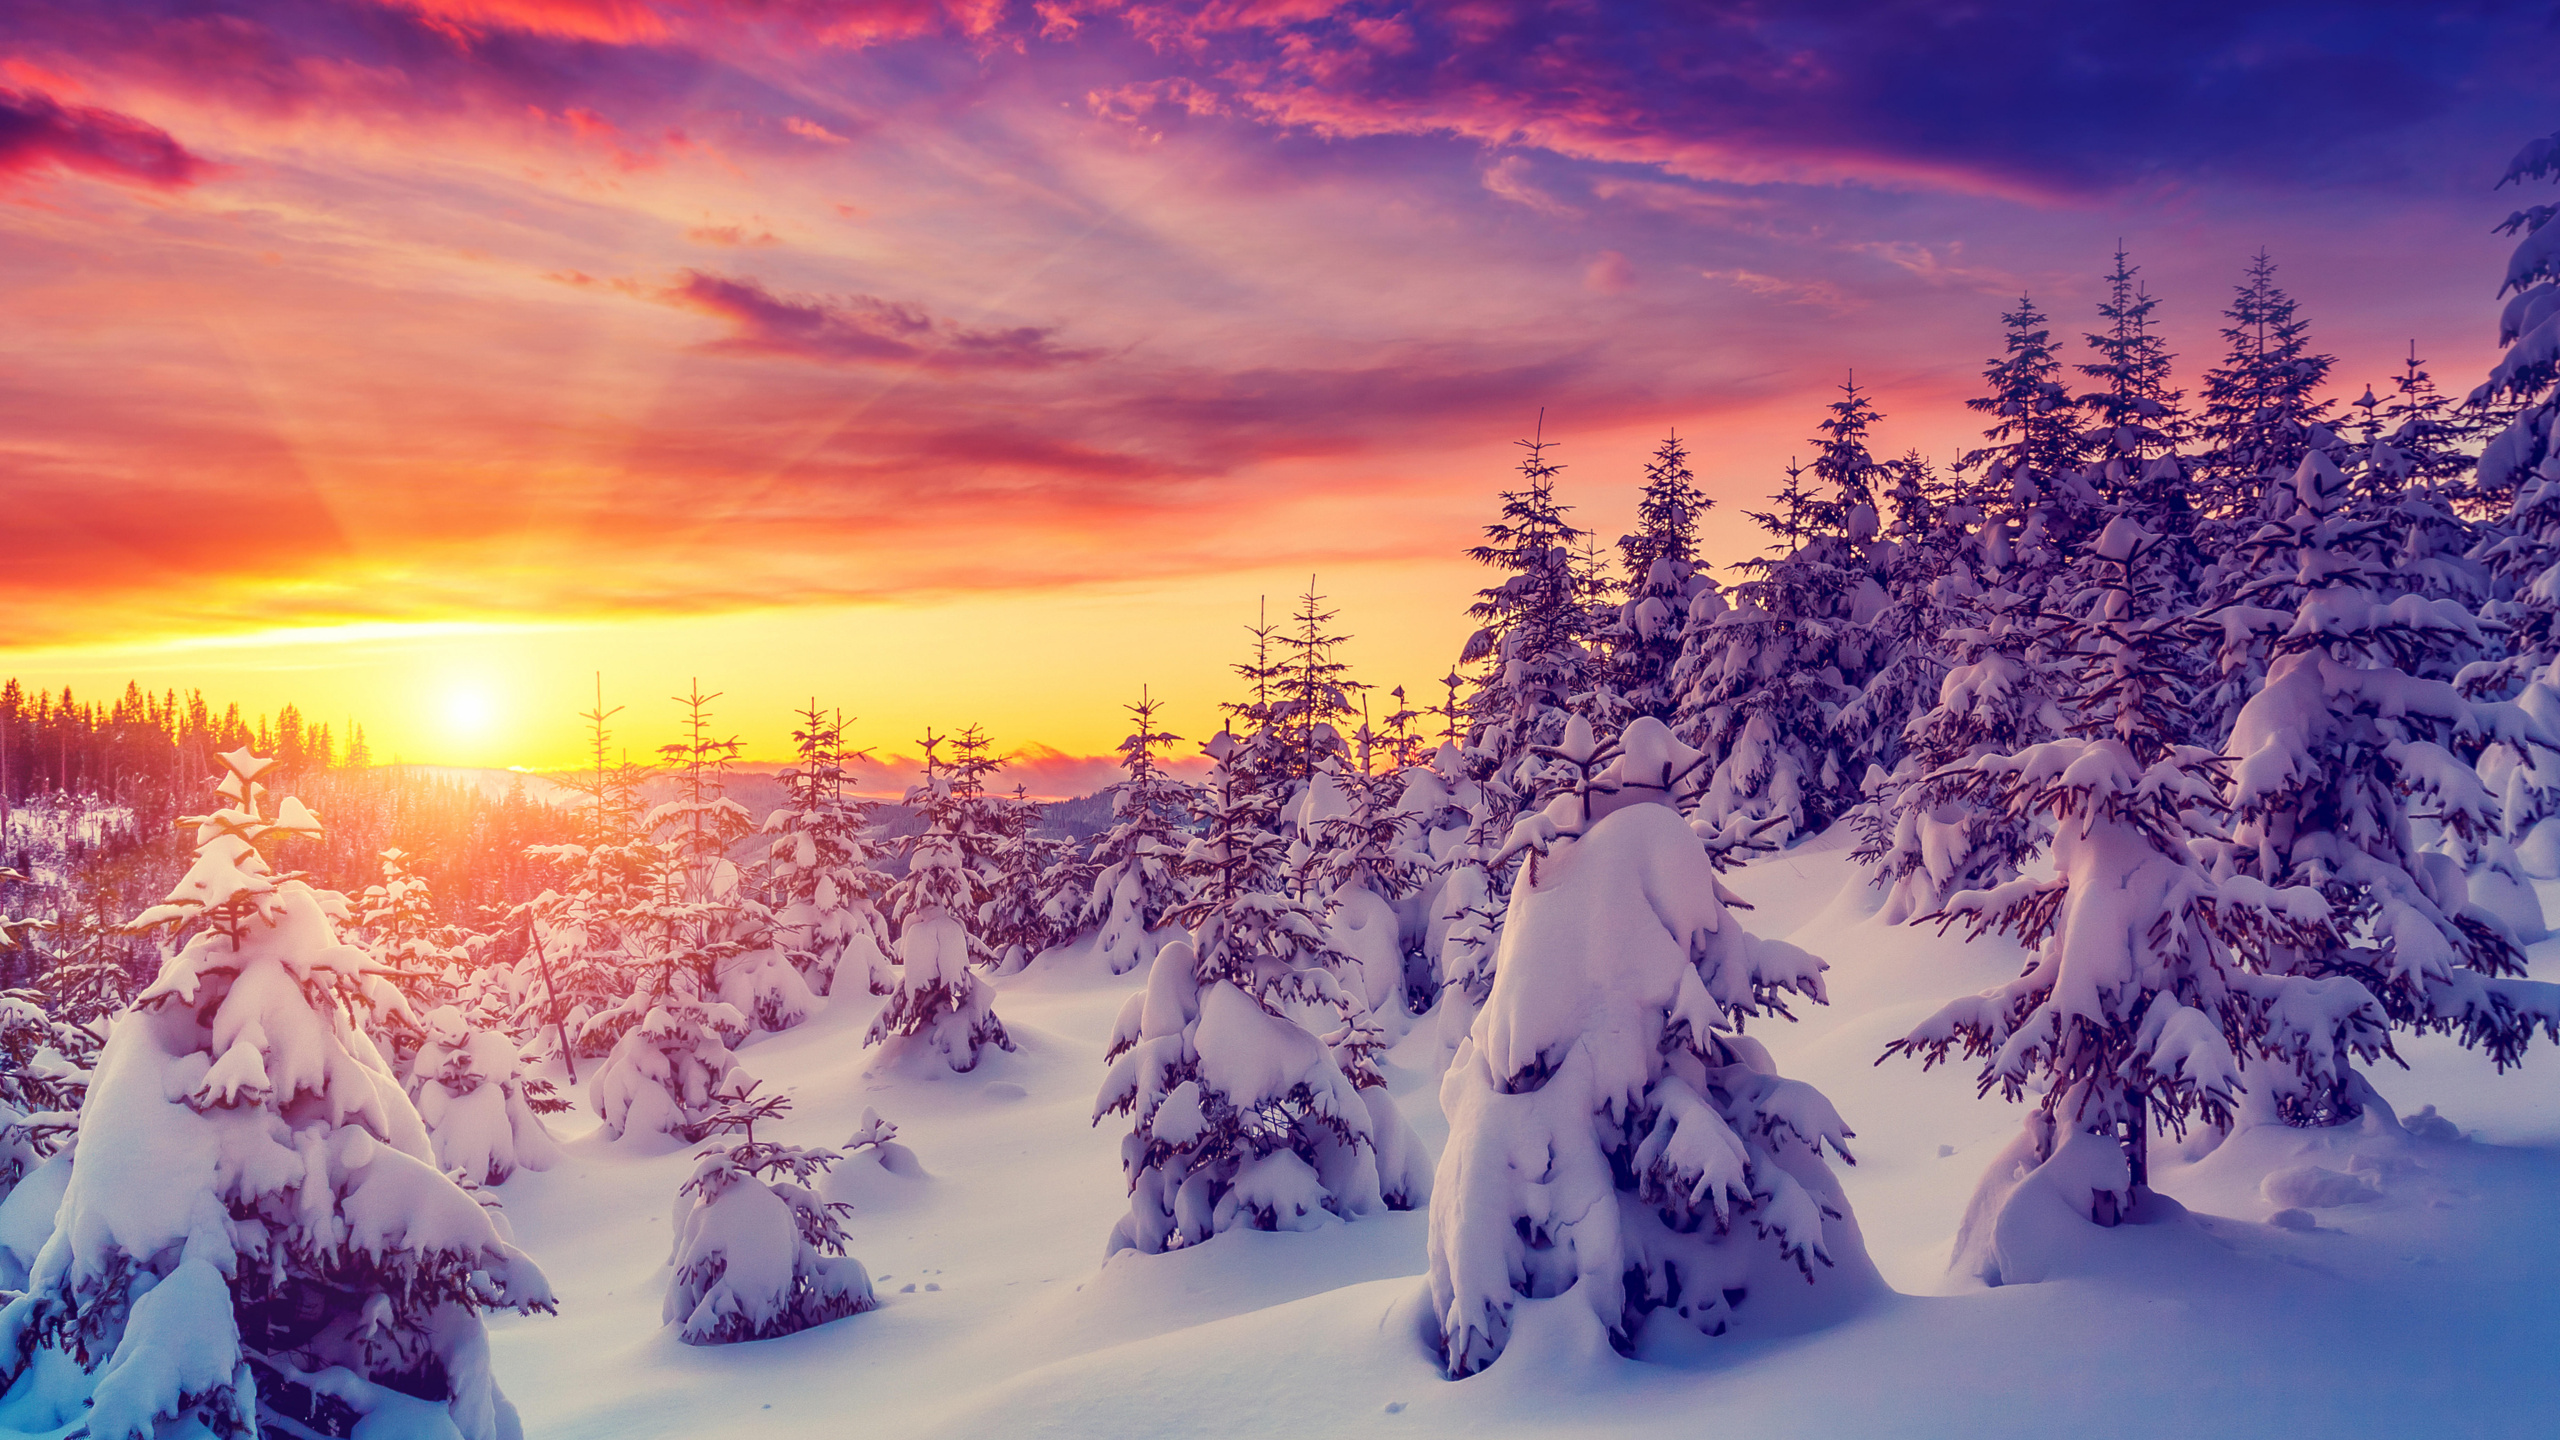 Snow Covered Trees During Sunset. Wallpaper in 2560x1440 Resolution